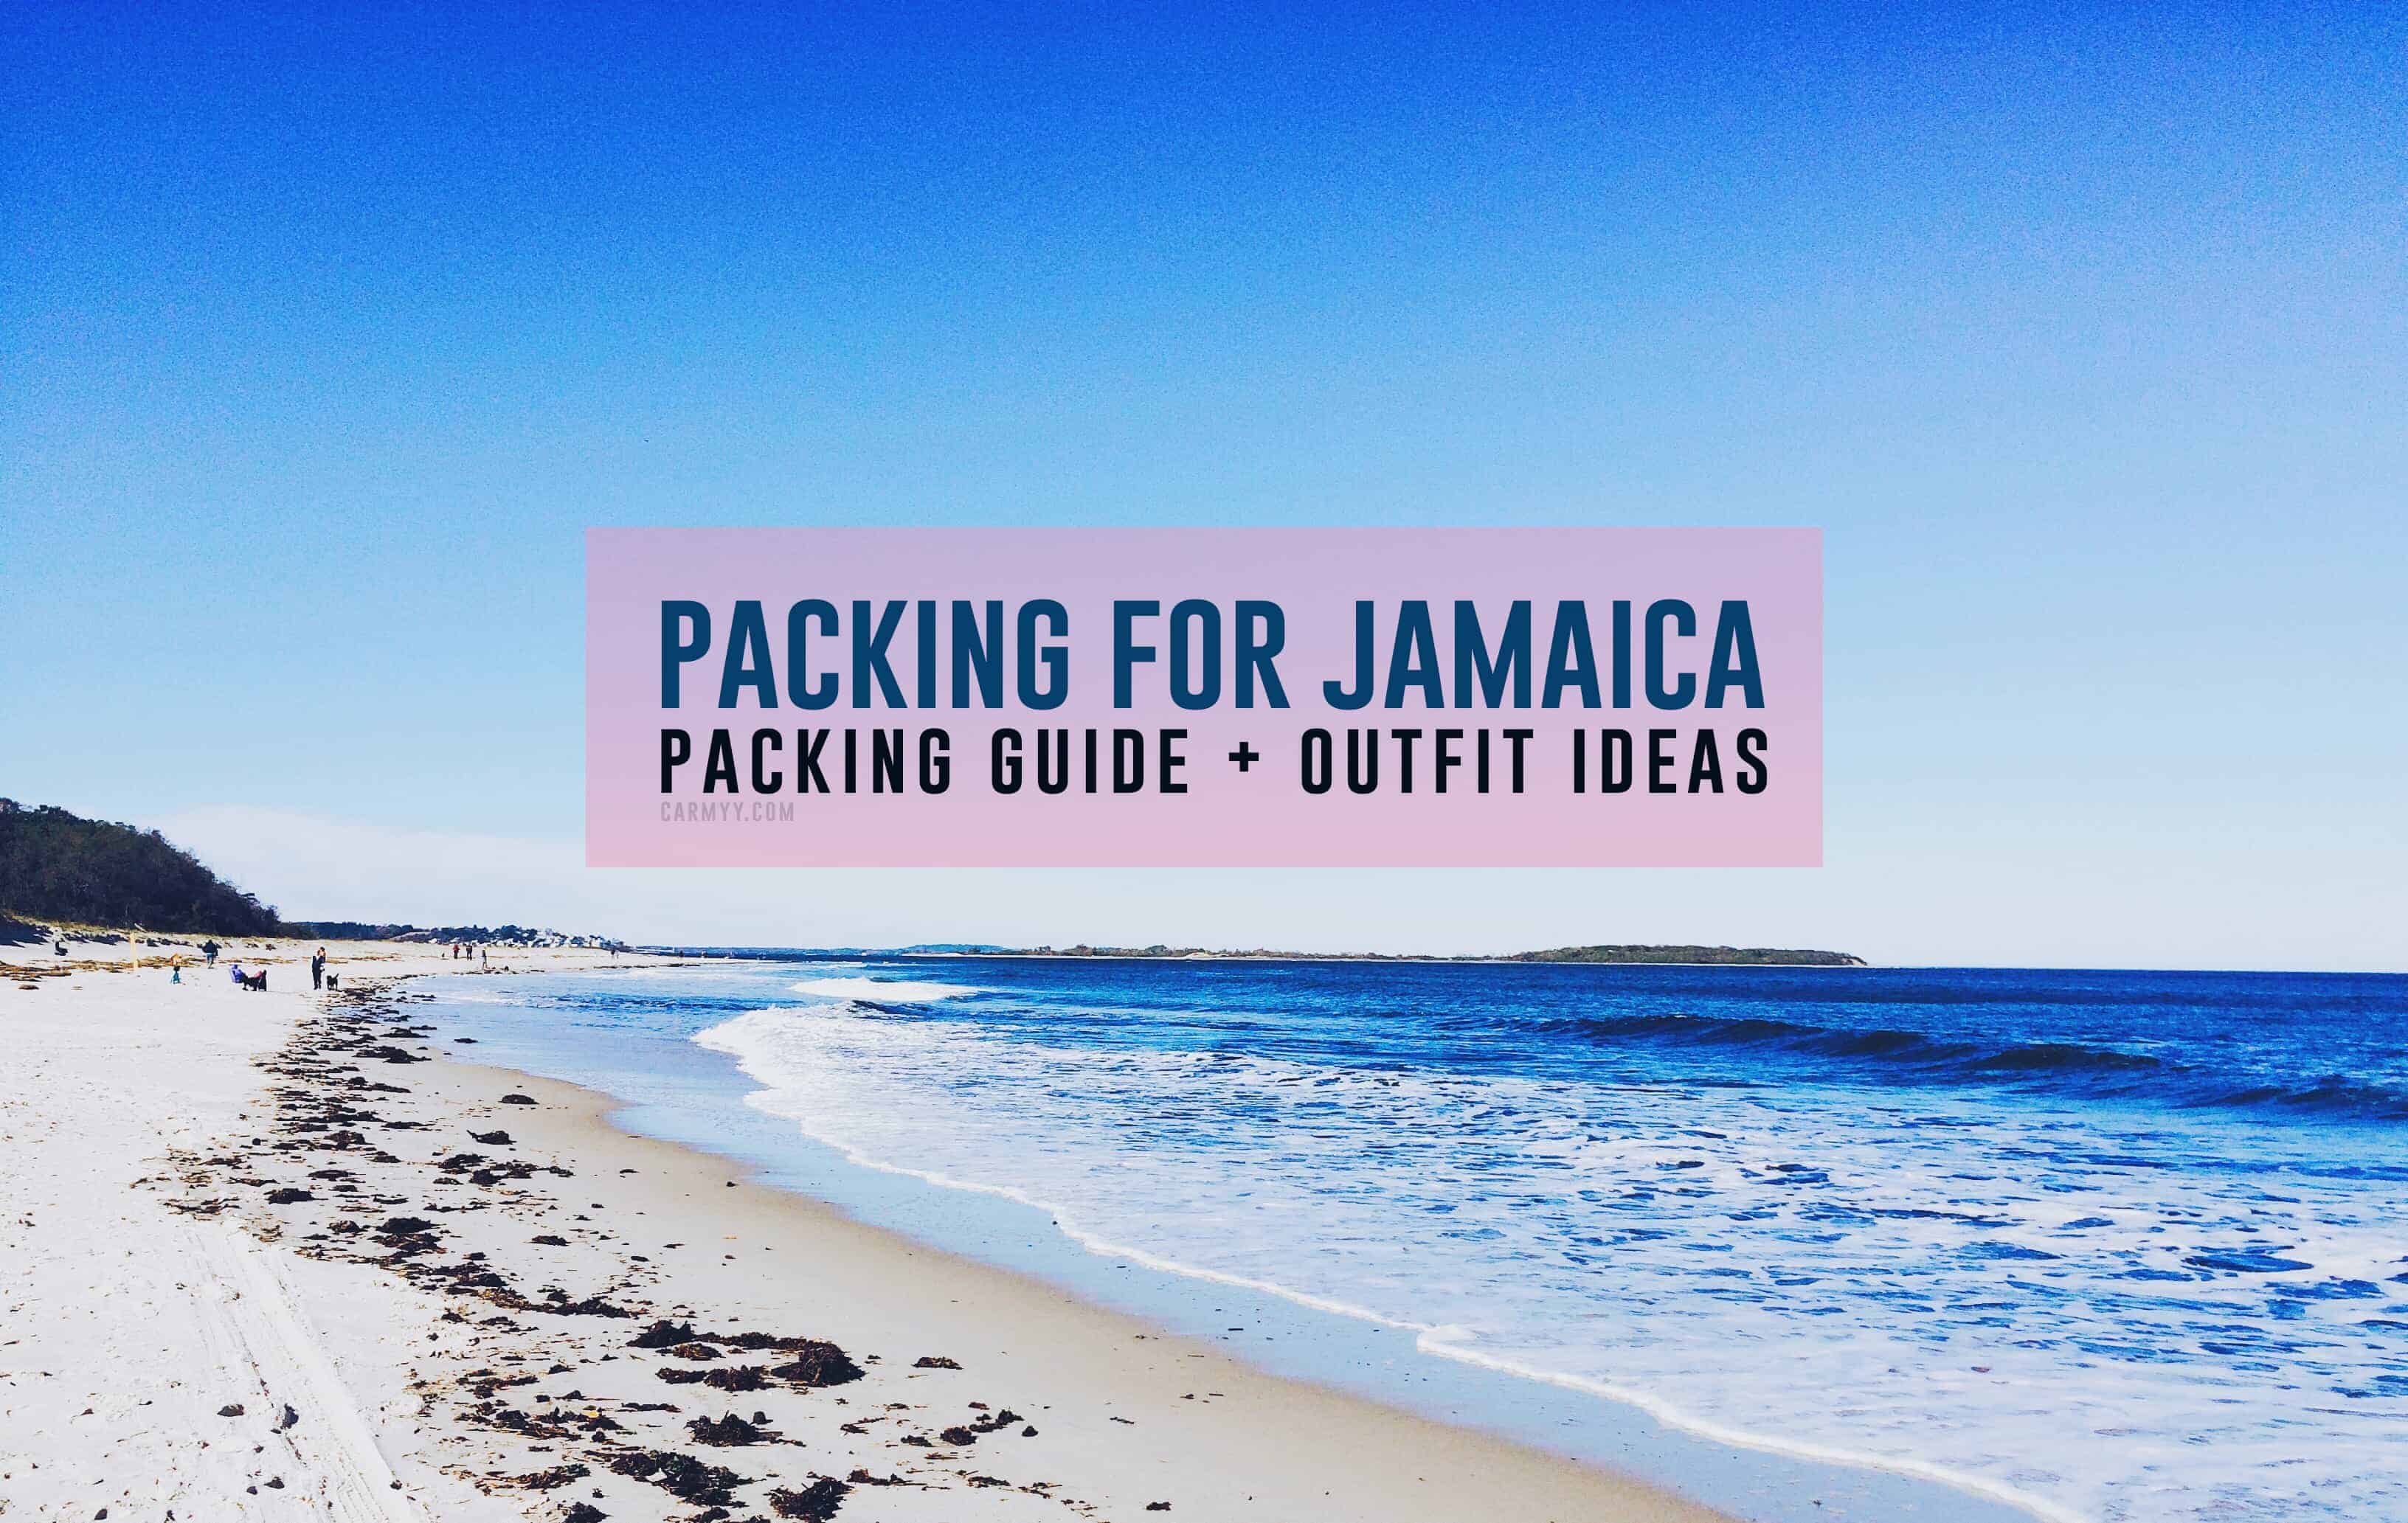 Packing for Jamaica: Packing Guide + Outfit Ideas - Carmy - Run Eat Travel